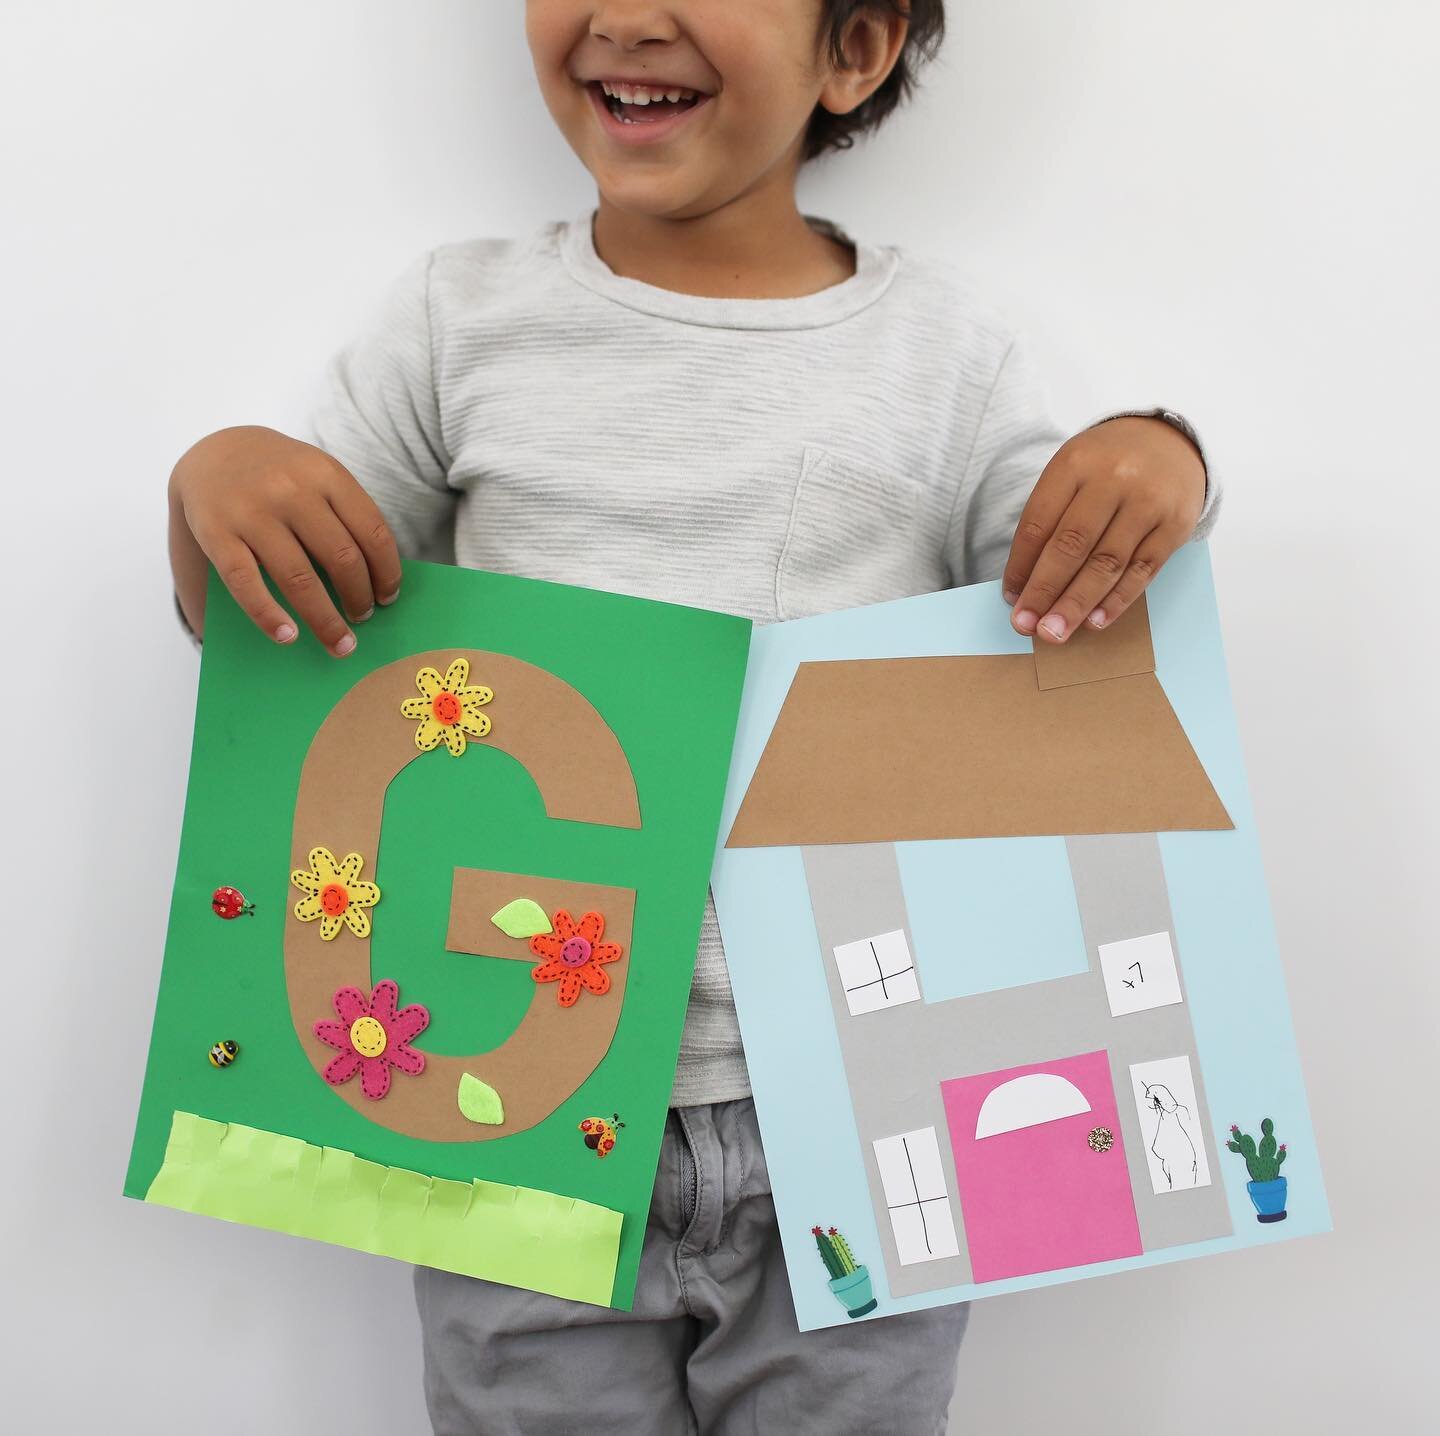 Today we begin week G + H // Garden and Home. Kids will engage in garden counting crafts, learn about habitats and even have the supplies to Grow their own Grass.
.
.

#bayareakids #bayareafamilies #schoolinabox #toddlers #toddlersofinstagram #toddle